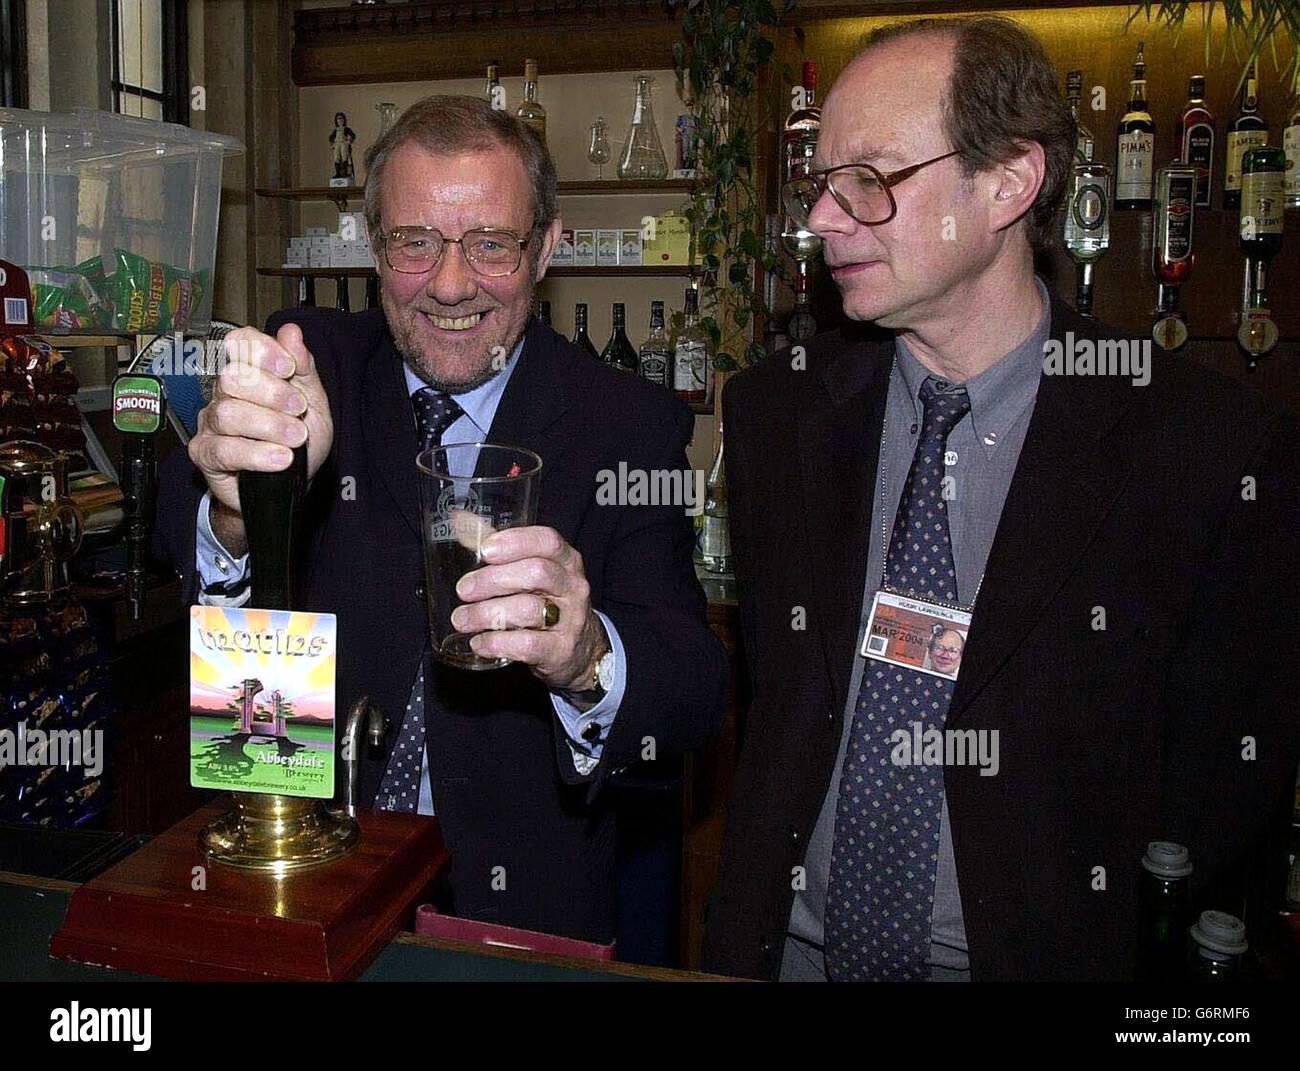 Richard Caborn MP (Sheffield) with Sheffield Star reporter Huw Lawrence in the Strangers bar in the House of Commons, pictured in front of a Sheffield brewery pump. Mr Cabourn has an empty glass as the beer has run out, such is it's popularity. Stock Photo